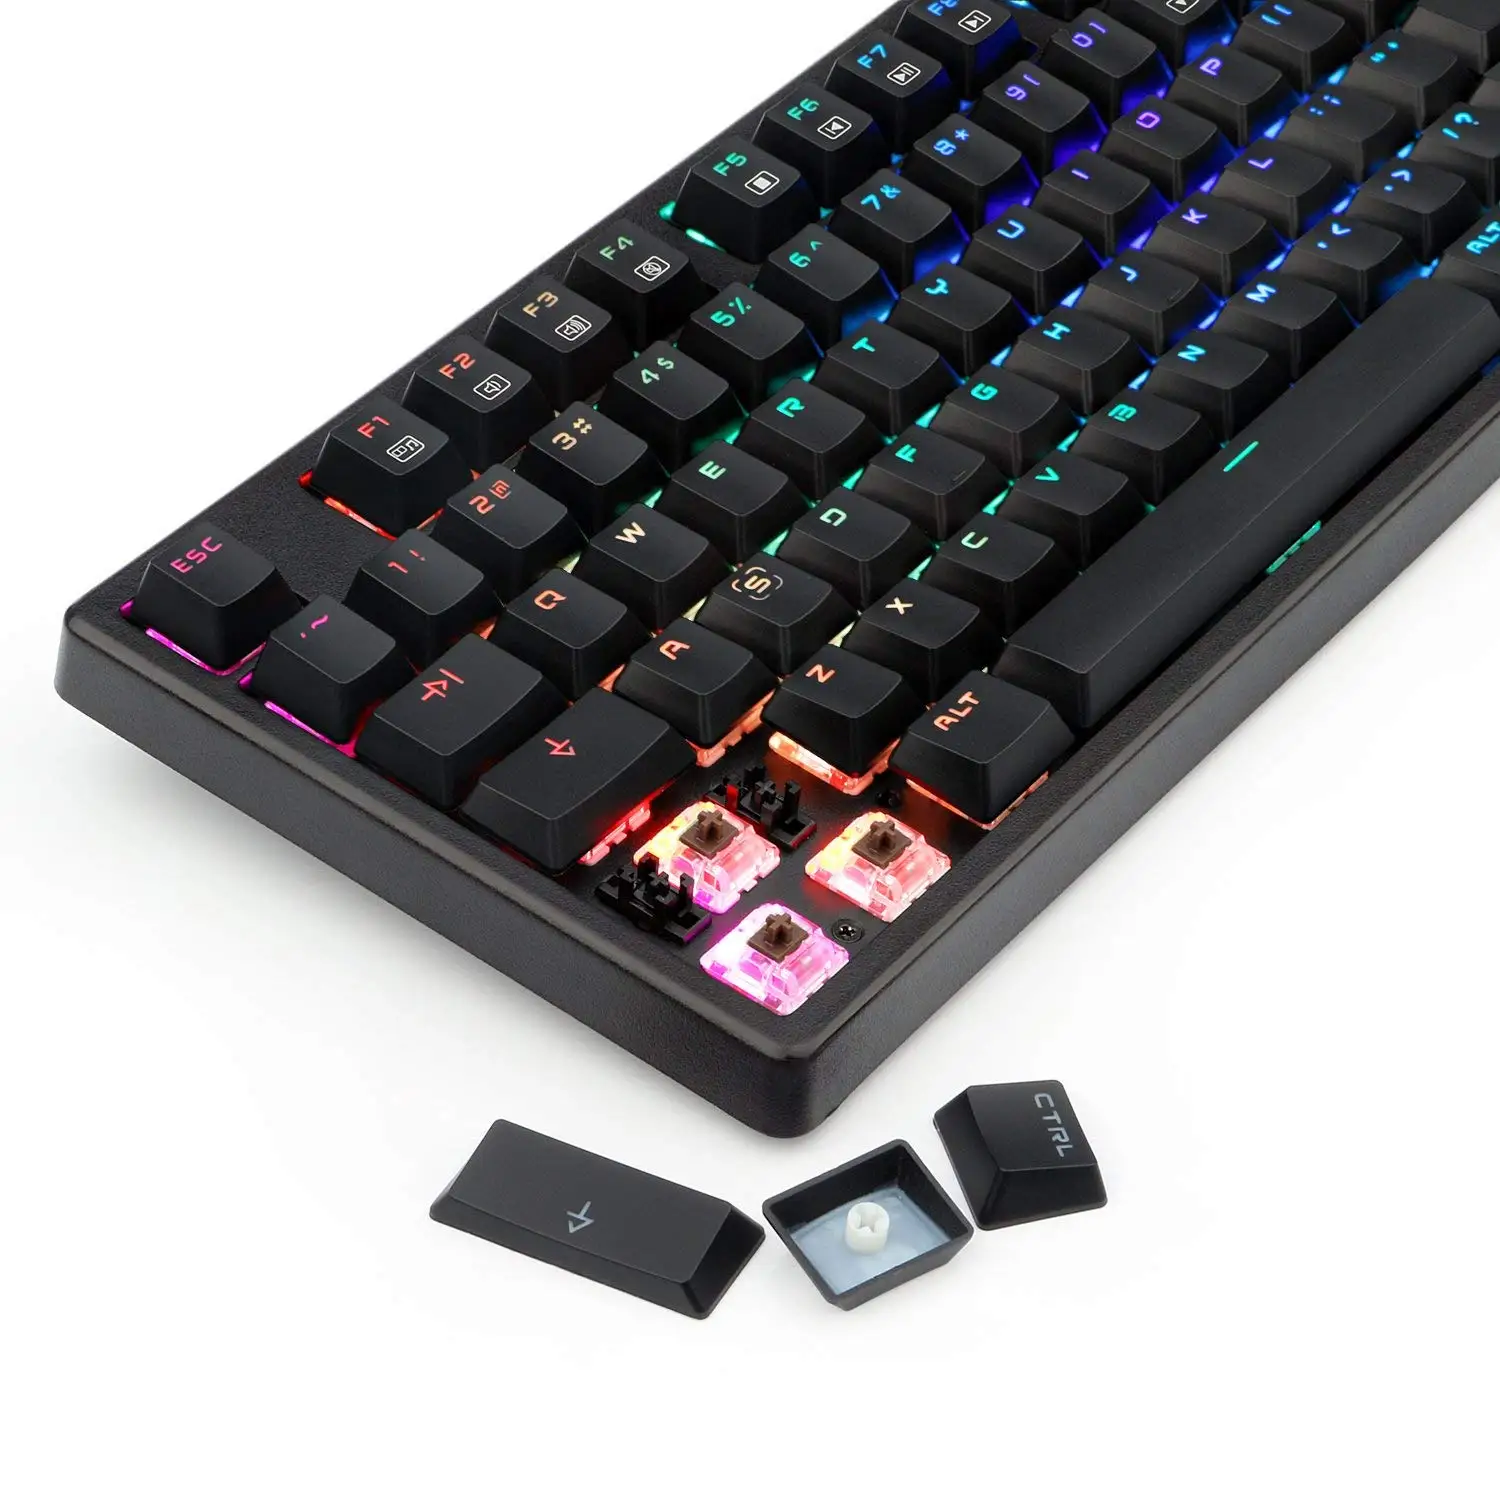 Can be customized for high quality K578 RGB mechanical gaming keyboard